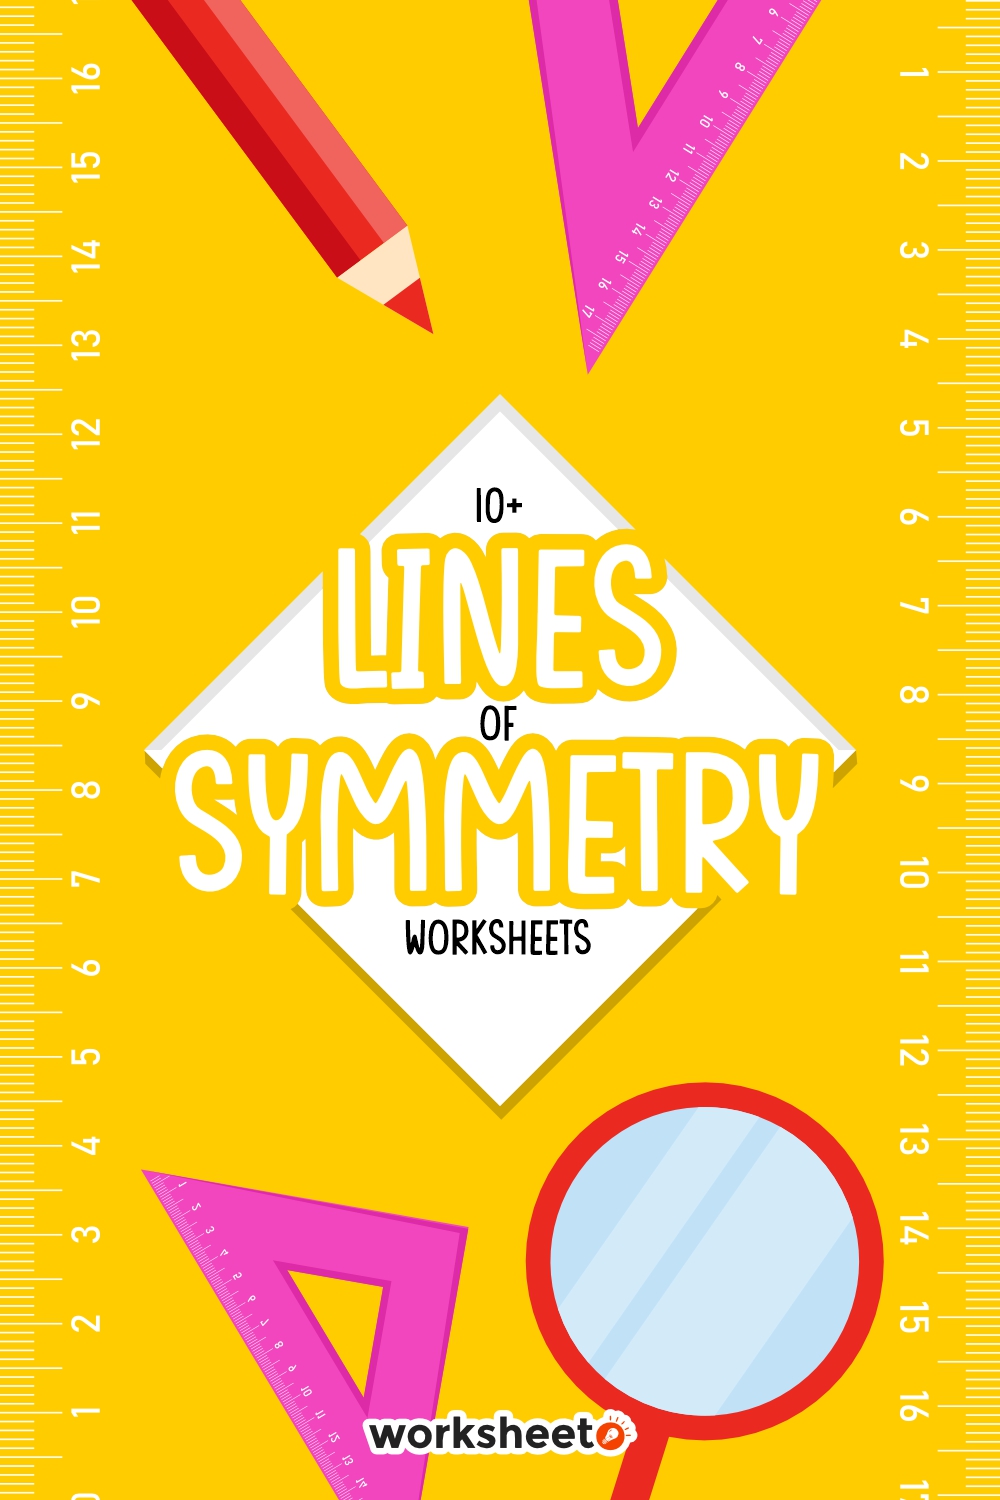 14 Images of Lines Of Symmetry Worksheets